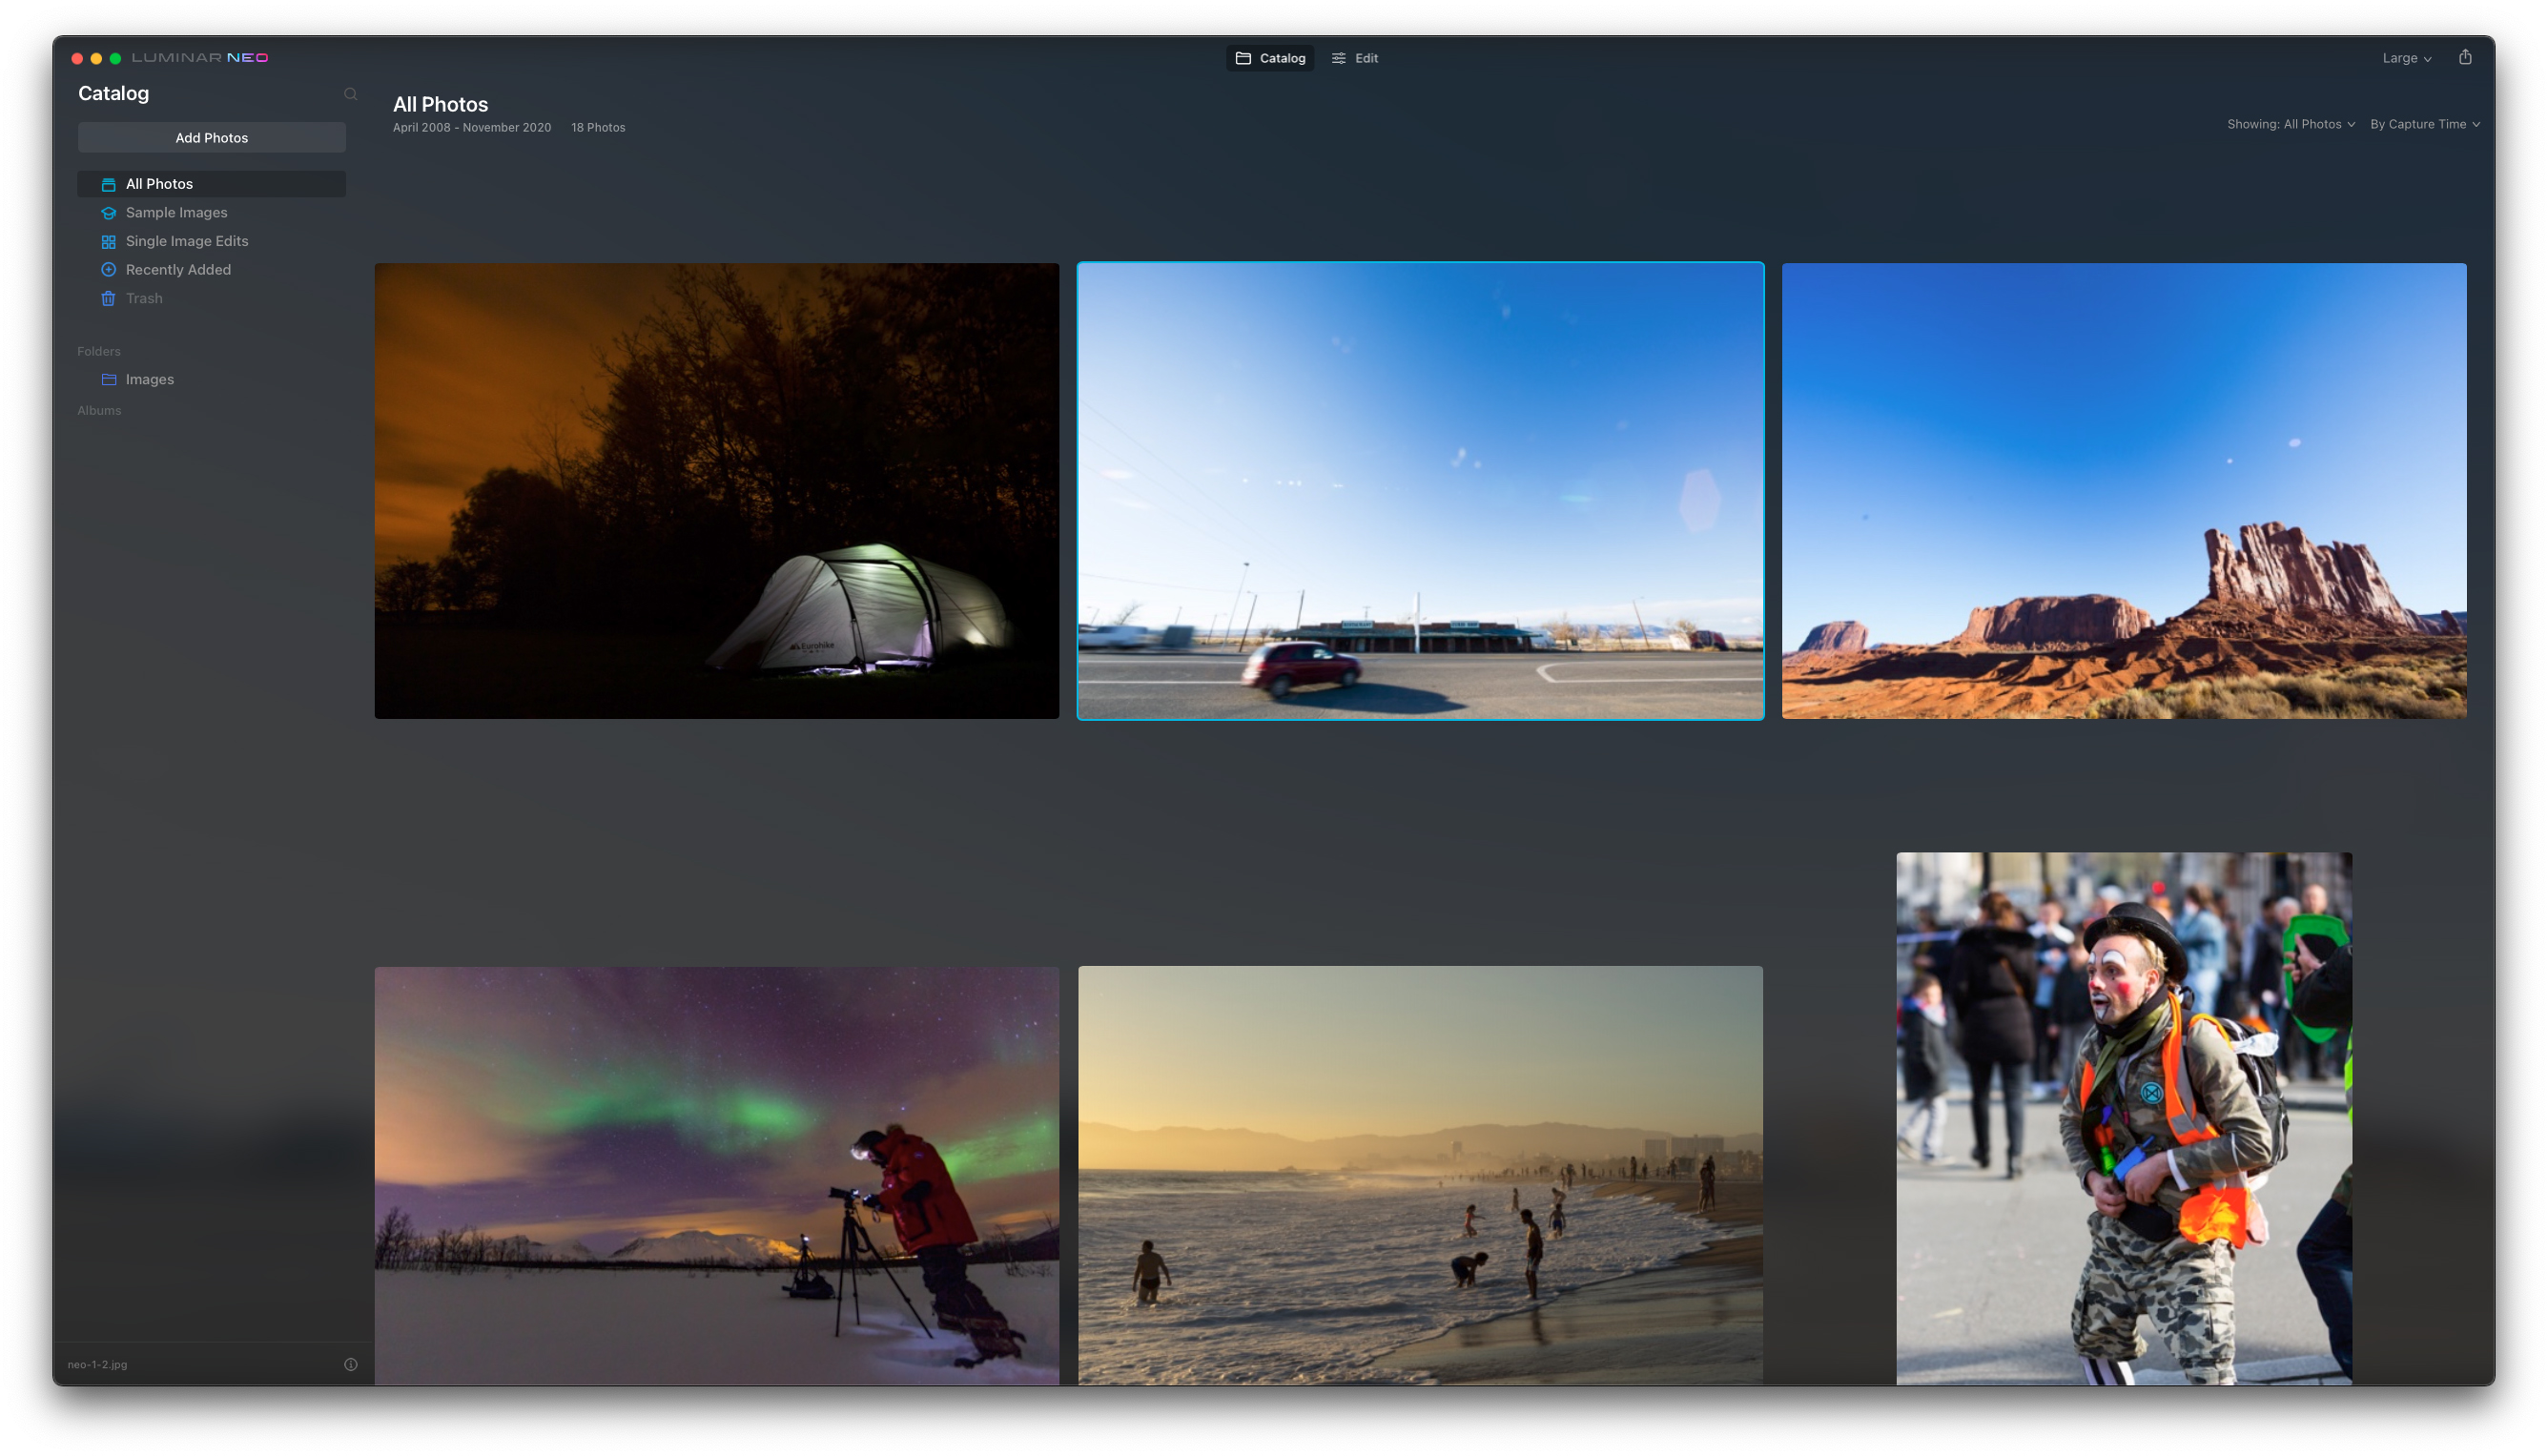 A catalogue of images in the Luminar Neo photo editing software